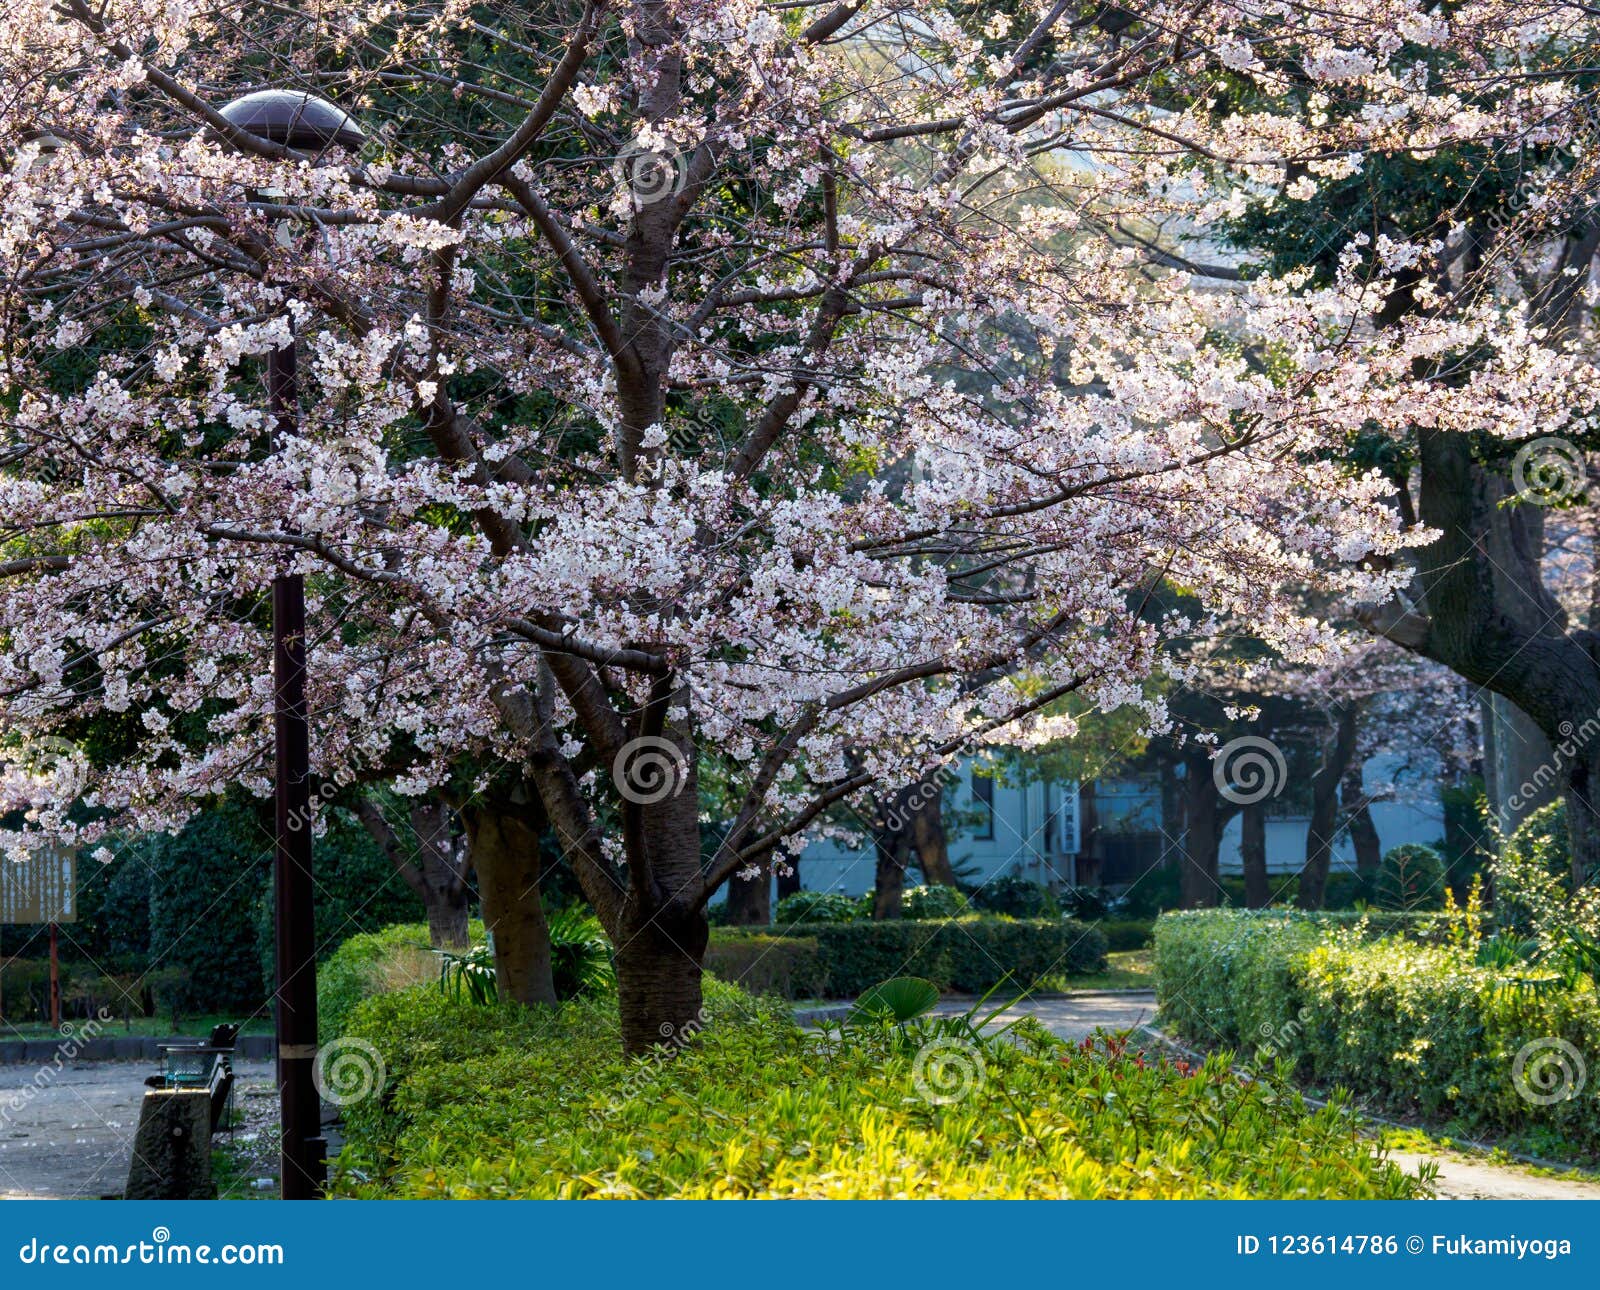 Cherry blossoms in Japan stock photo. Image of vivid - 123614786